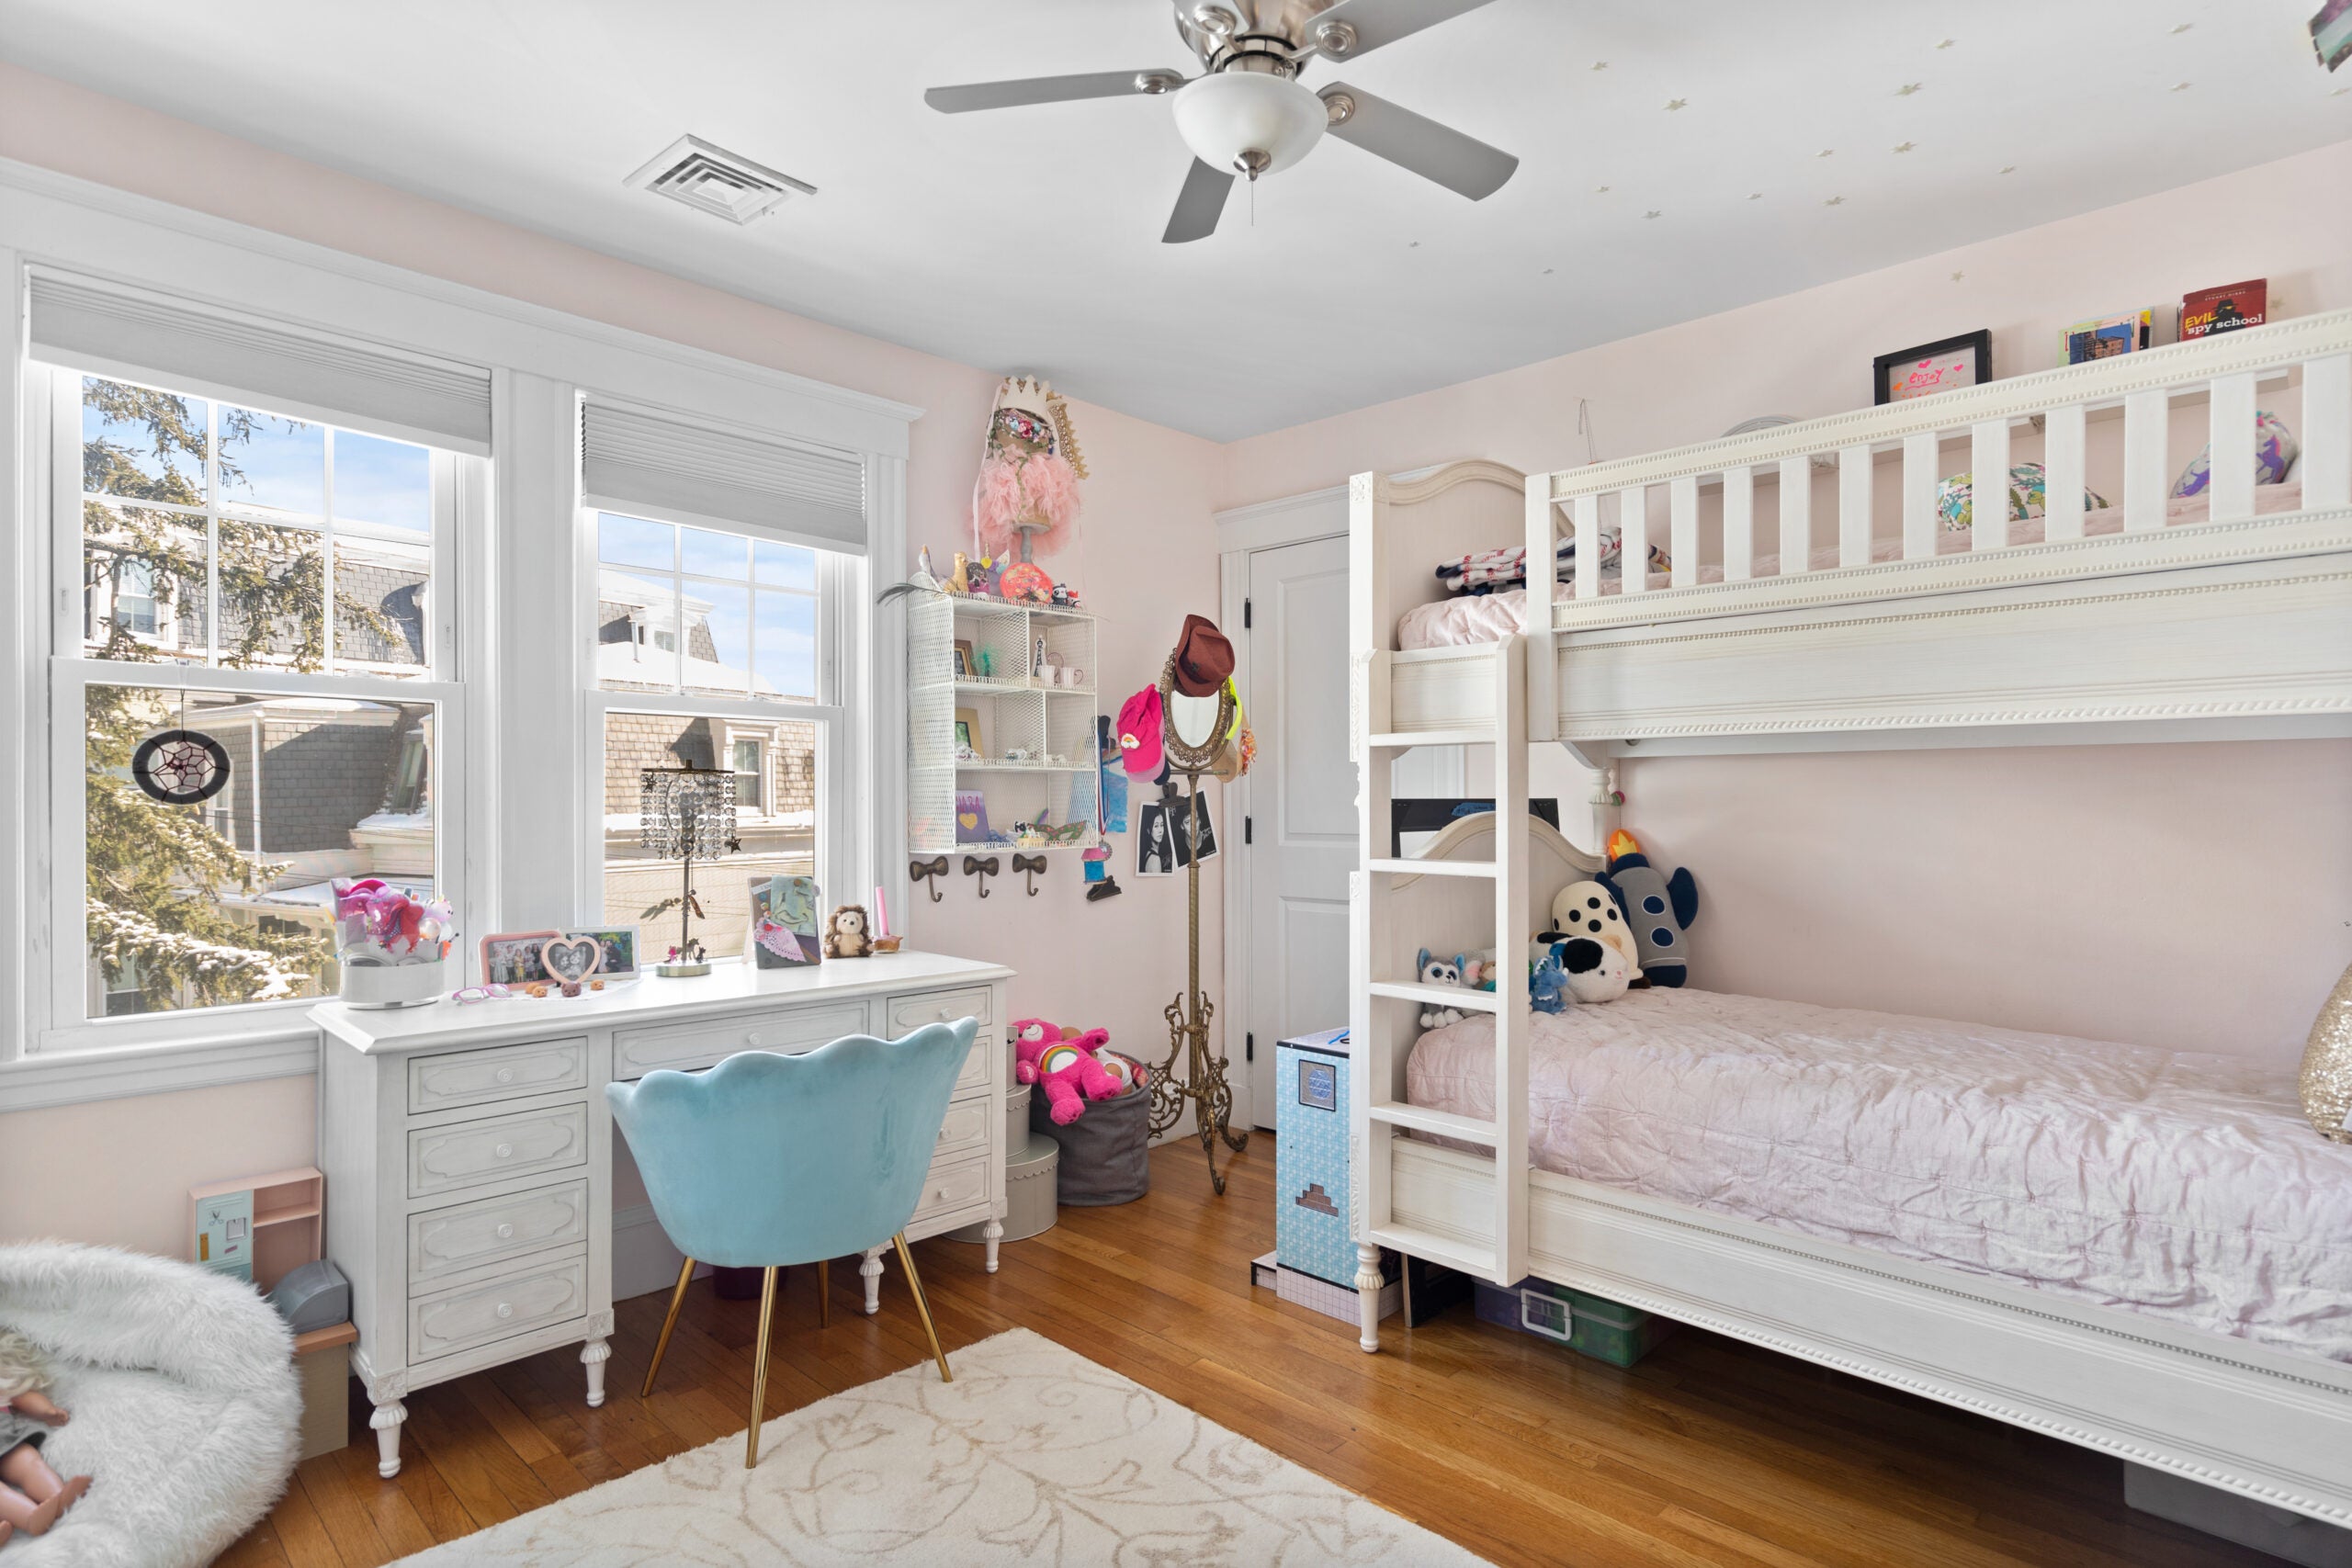 A room in a Newton condo with white trim, light-pink walls, a white desk with a blue tulip chair, a white bunkbed with flowery pink bedding, wood flooring, a light-colored area rug, a beanbag chair, and a ceiling fan.